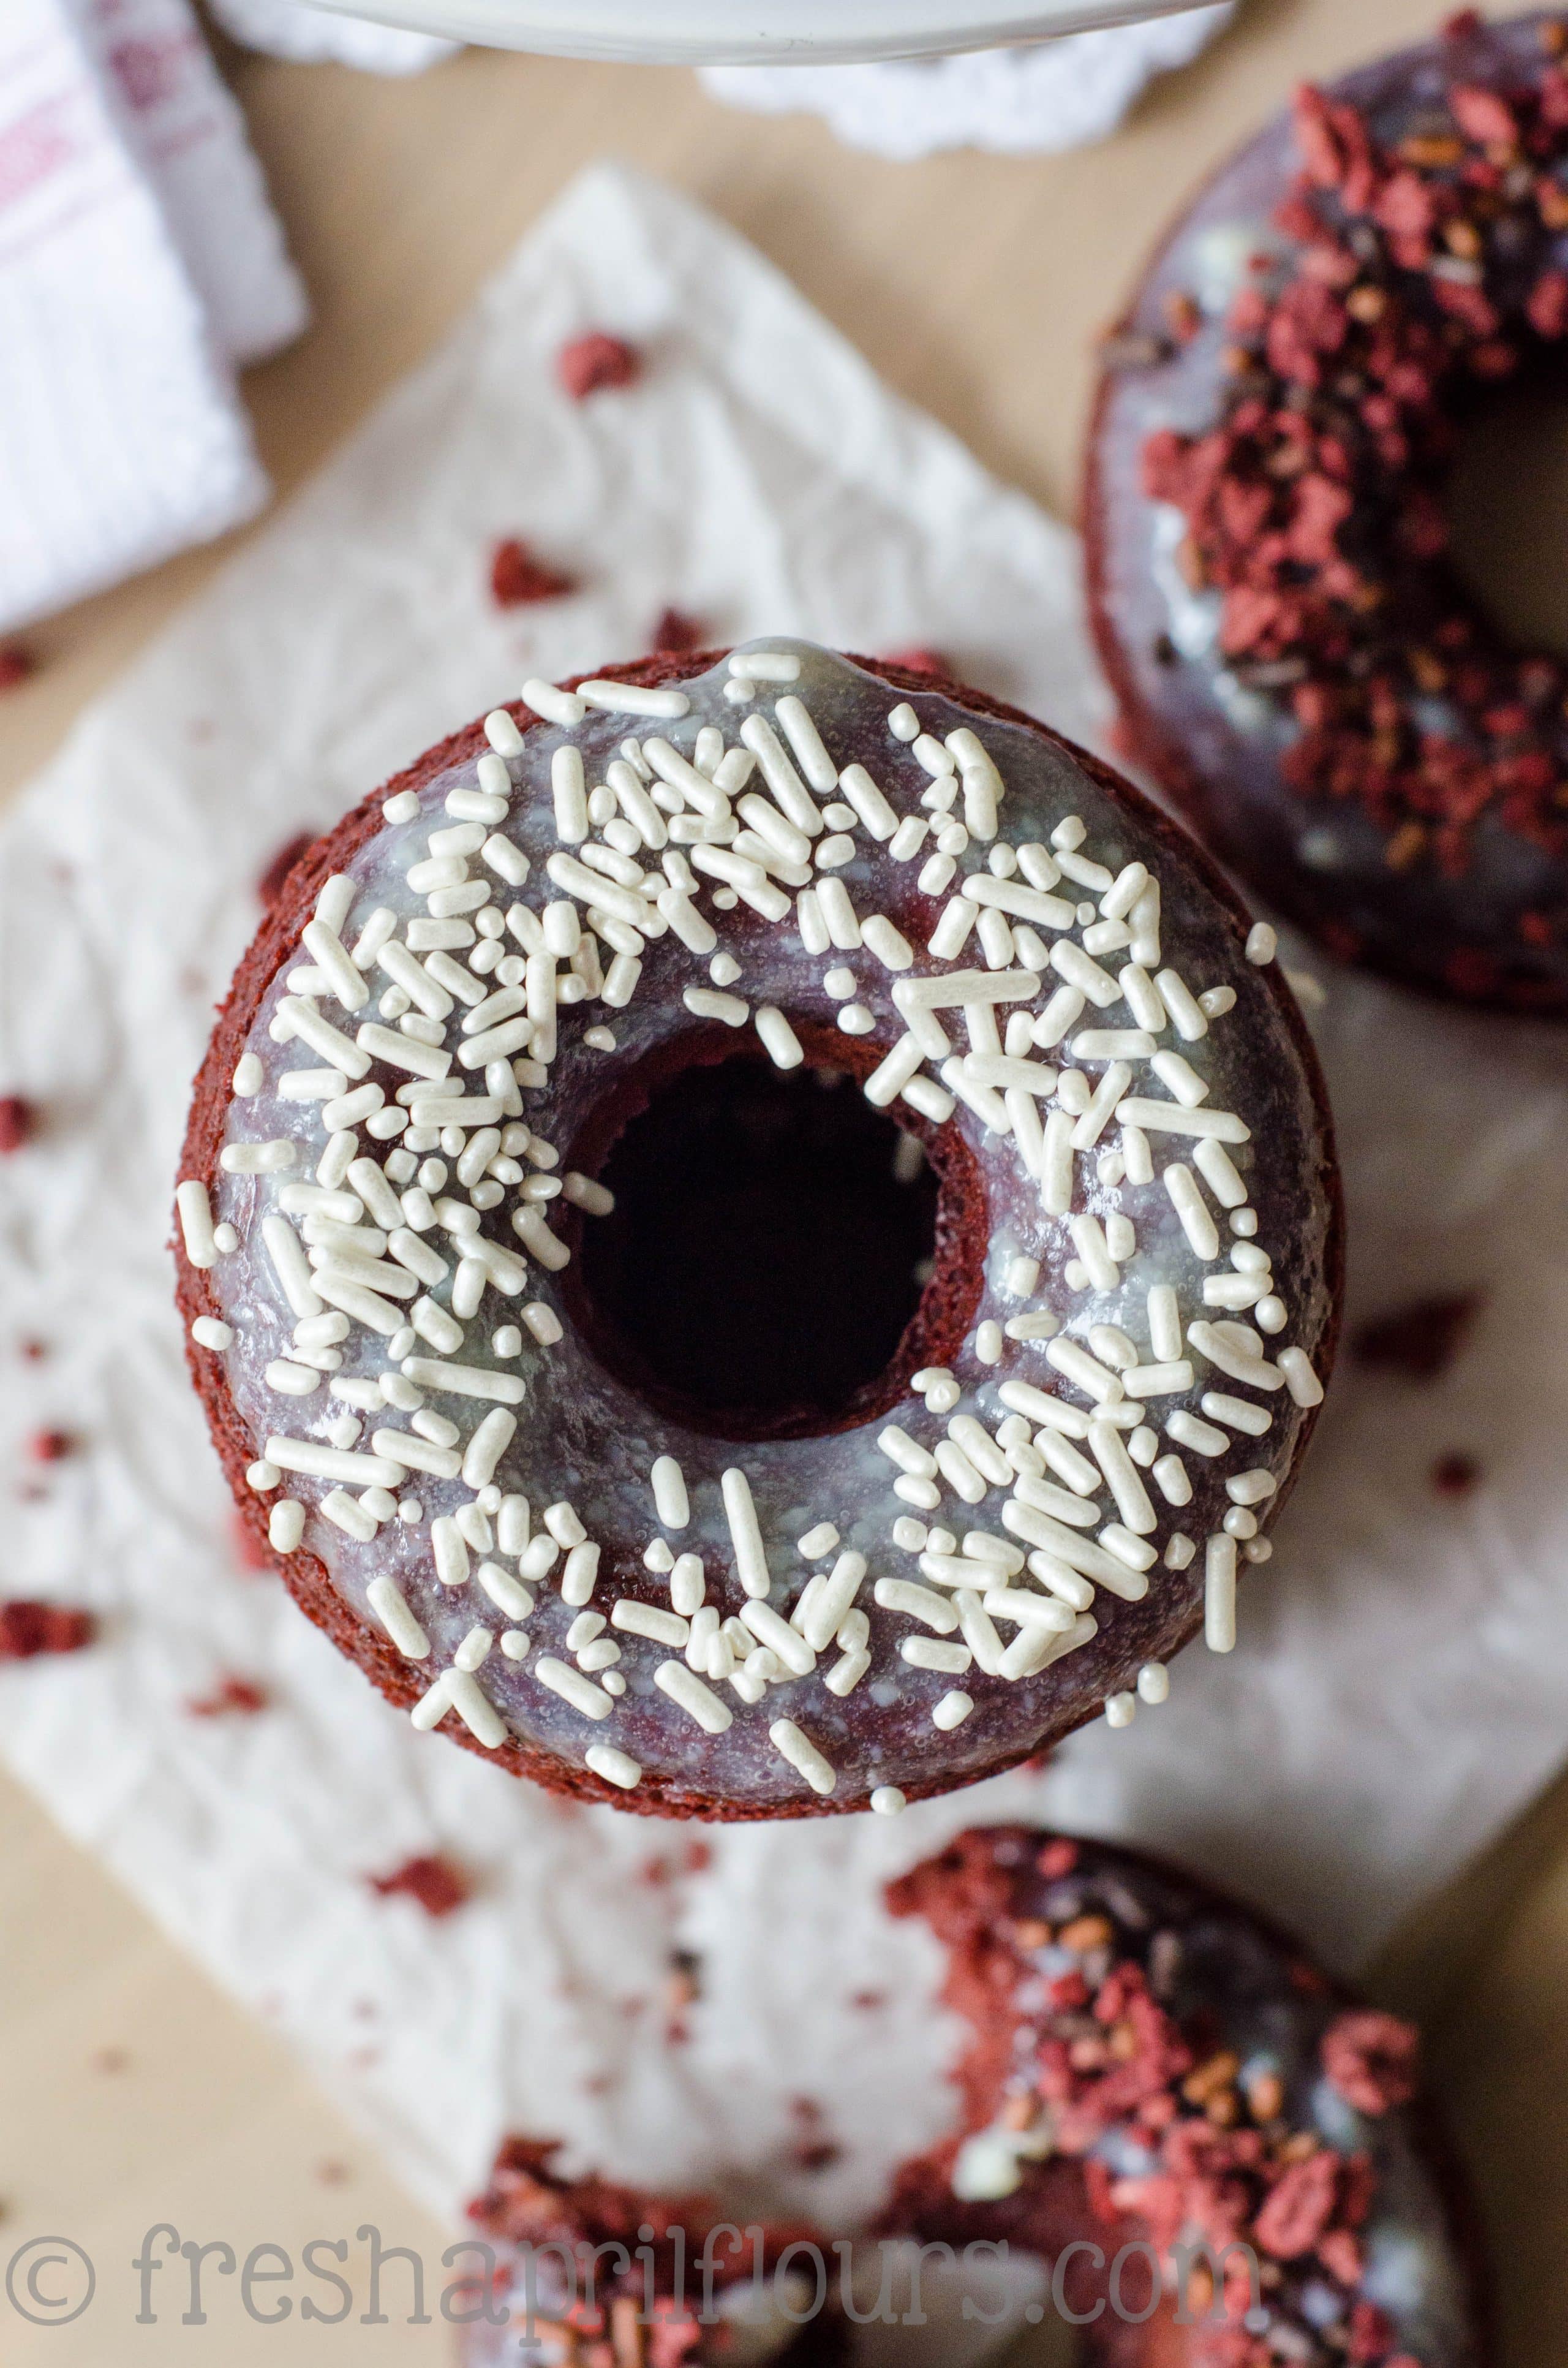 Baked Red Velvet Donuts: Fluffy, lightly sweetened and delicately tangy baked red velvet donuts topped with cream cheese glaze.